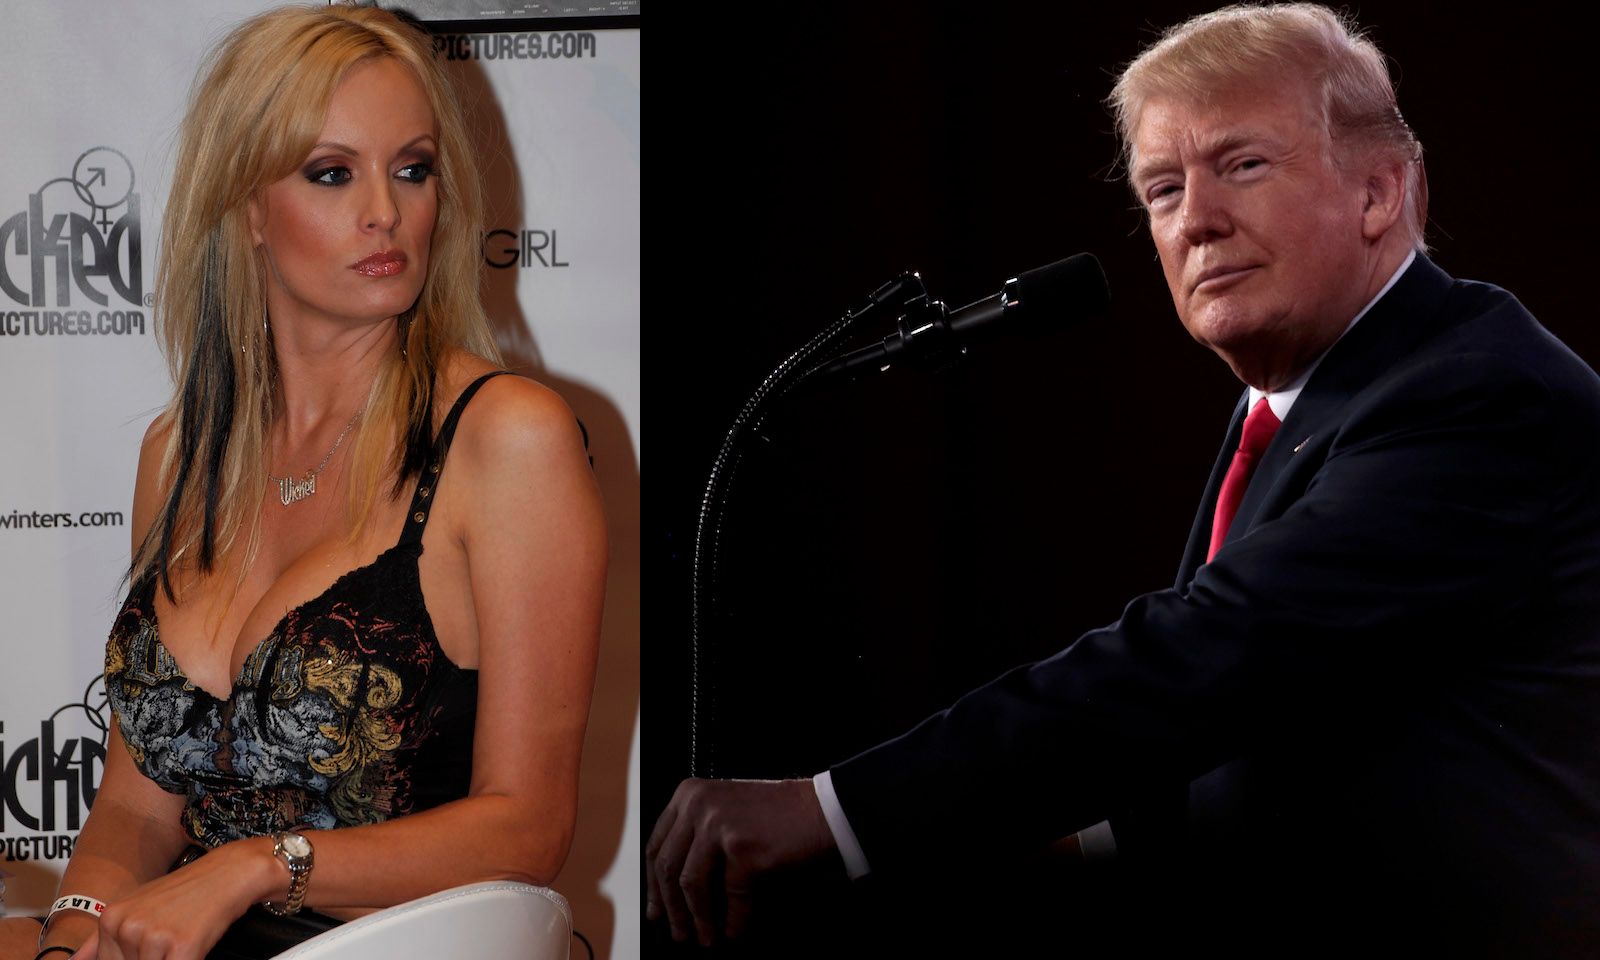 Trump Admits Cohen Repped Him On ‘This Crazy Stormy Daniels Deal’